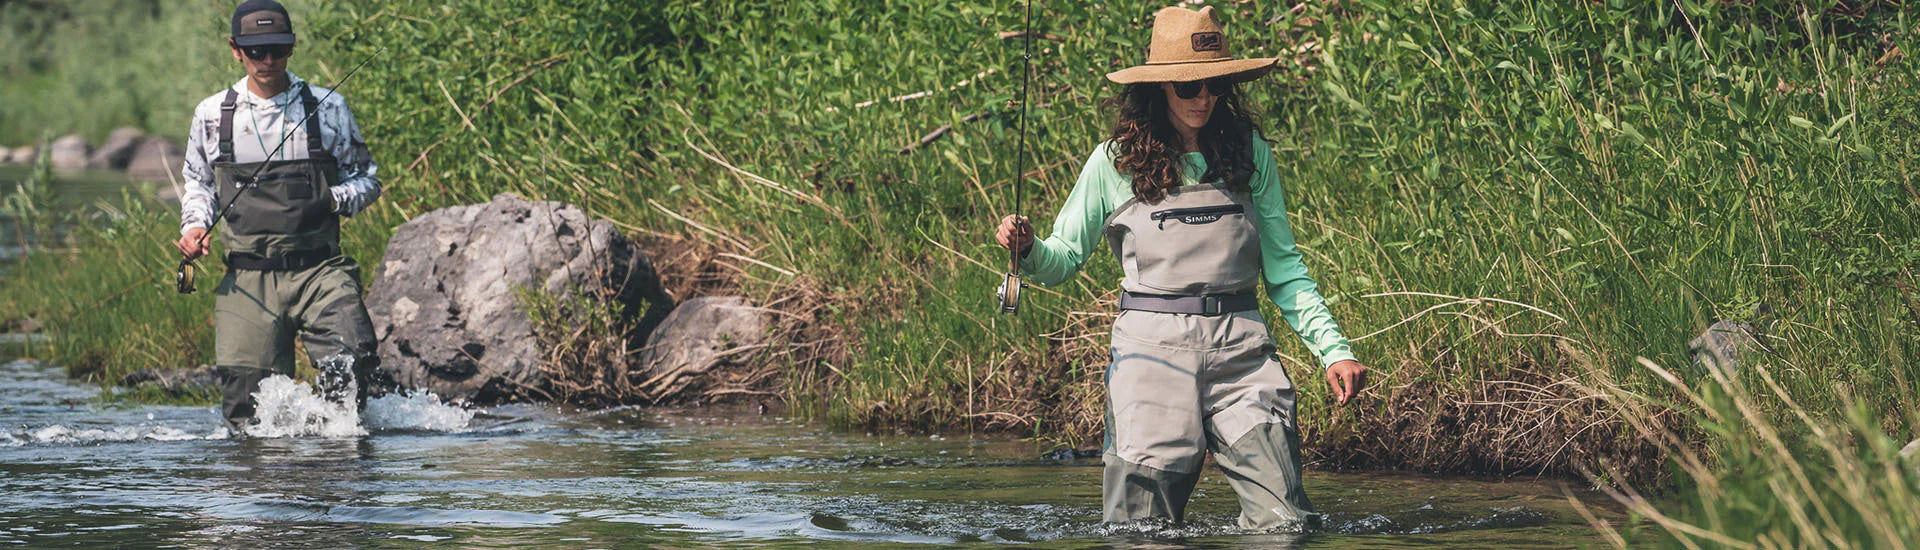 Women's Waders: The Ultimate Gear for Hunting, Fishing, and Off-Roadin